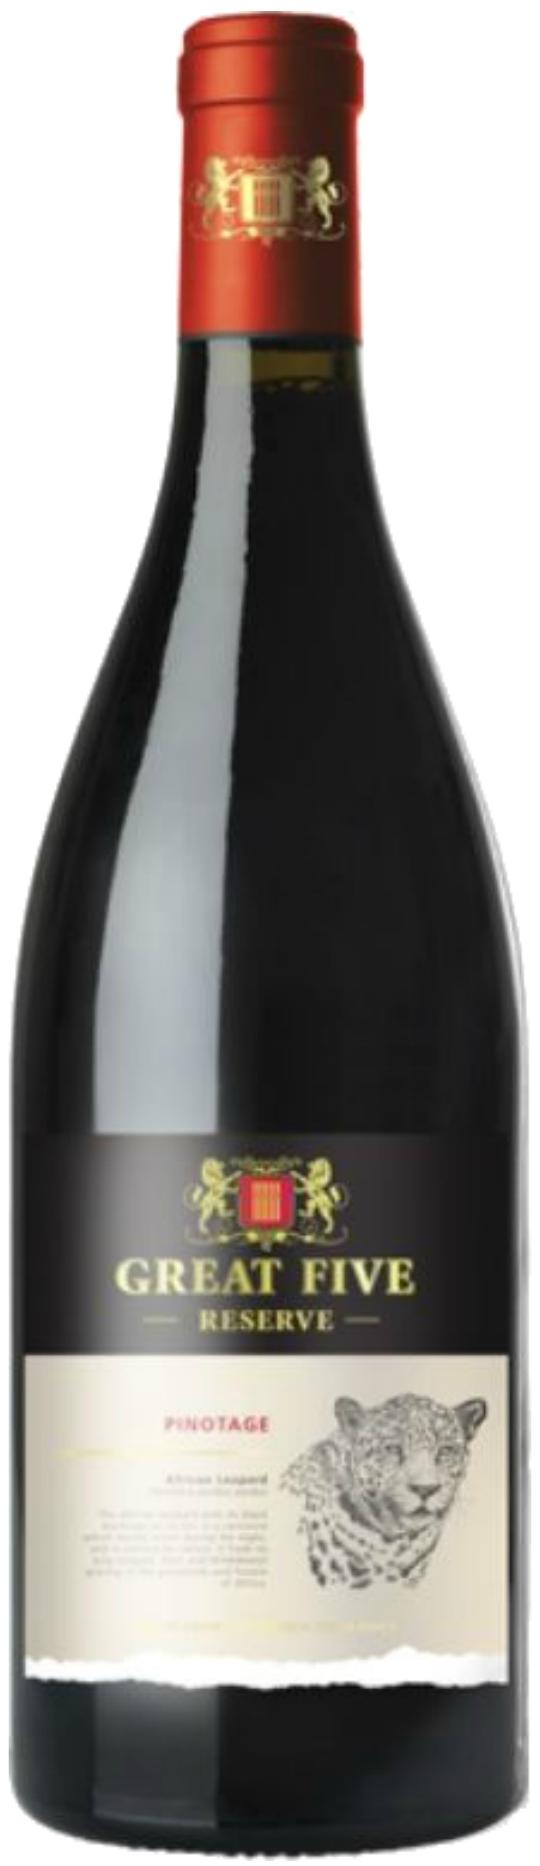 Stellenview Great Five Reserve Pinotage (Rotwein, Curry Cape) | Premium Südafrika, oHG Western Wines